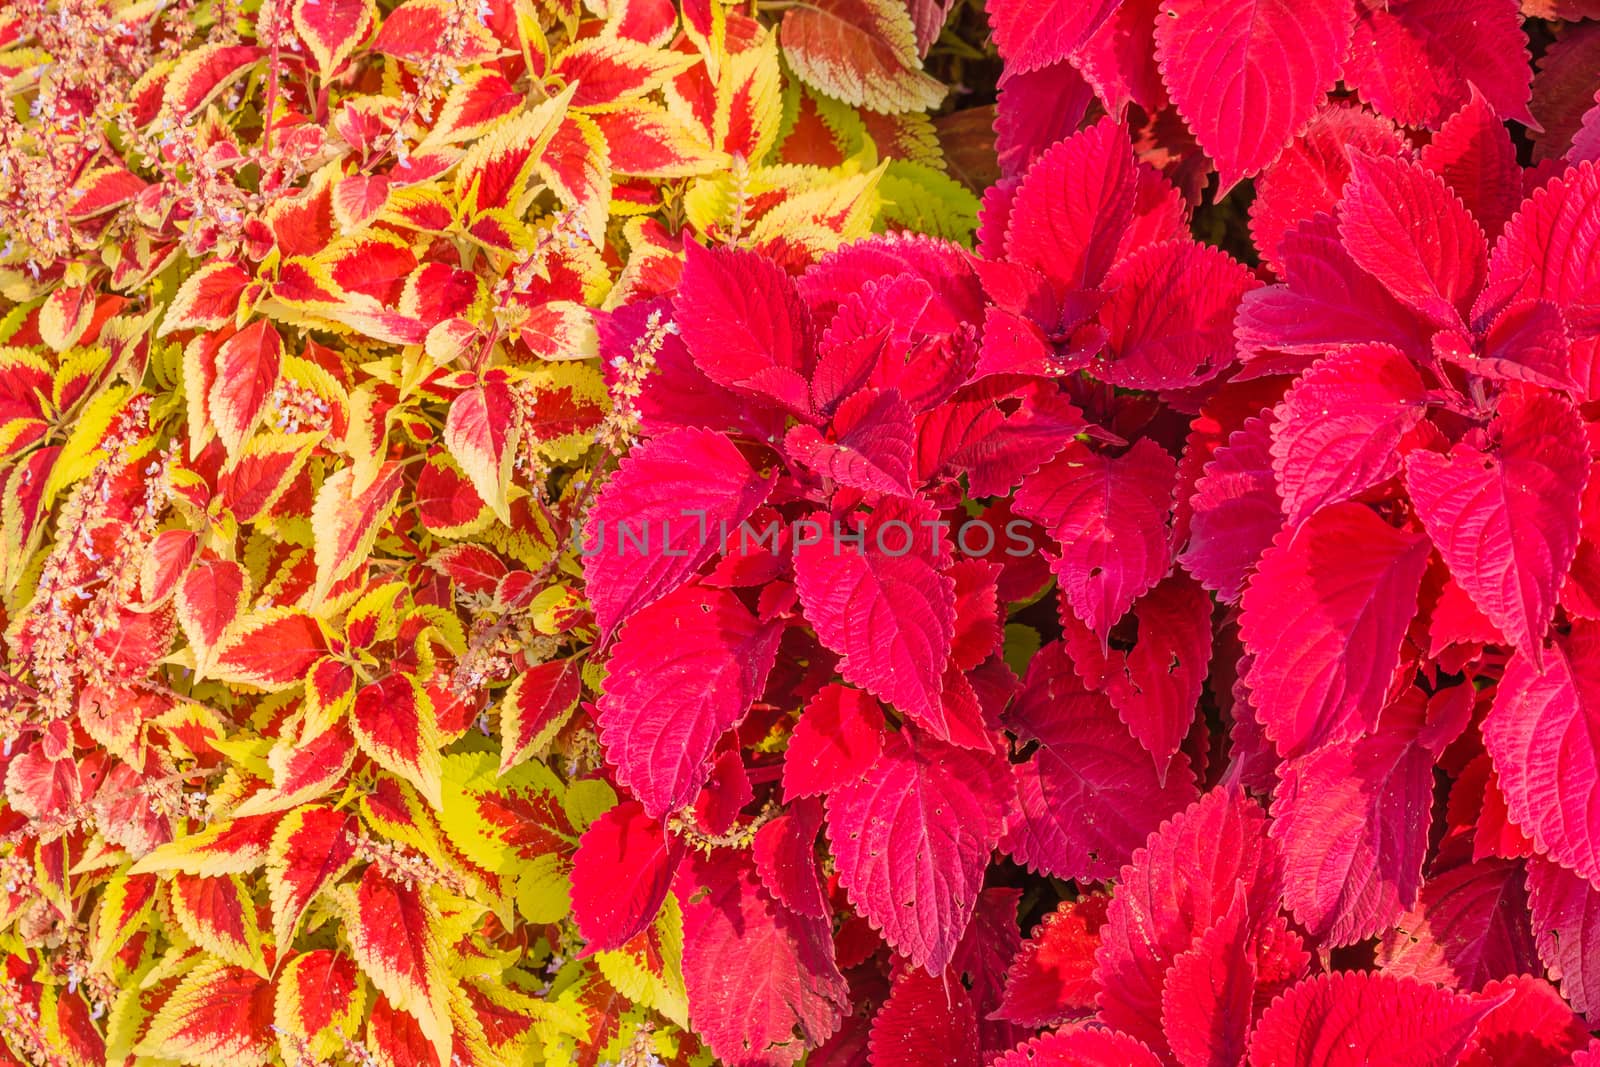 The coleus is native to Asia and Africa. In Italy it is cultivated mainly as a houseplant, for the beauty of its leaves which are showy and colored,